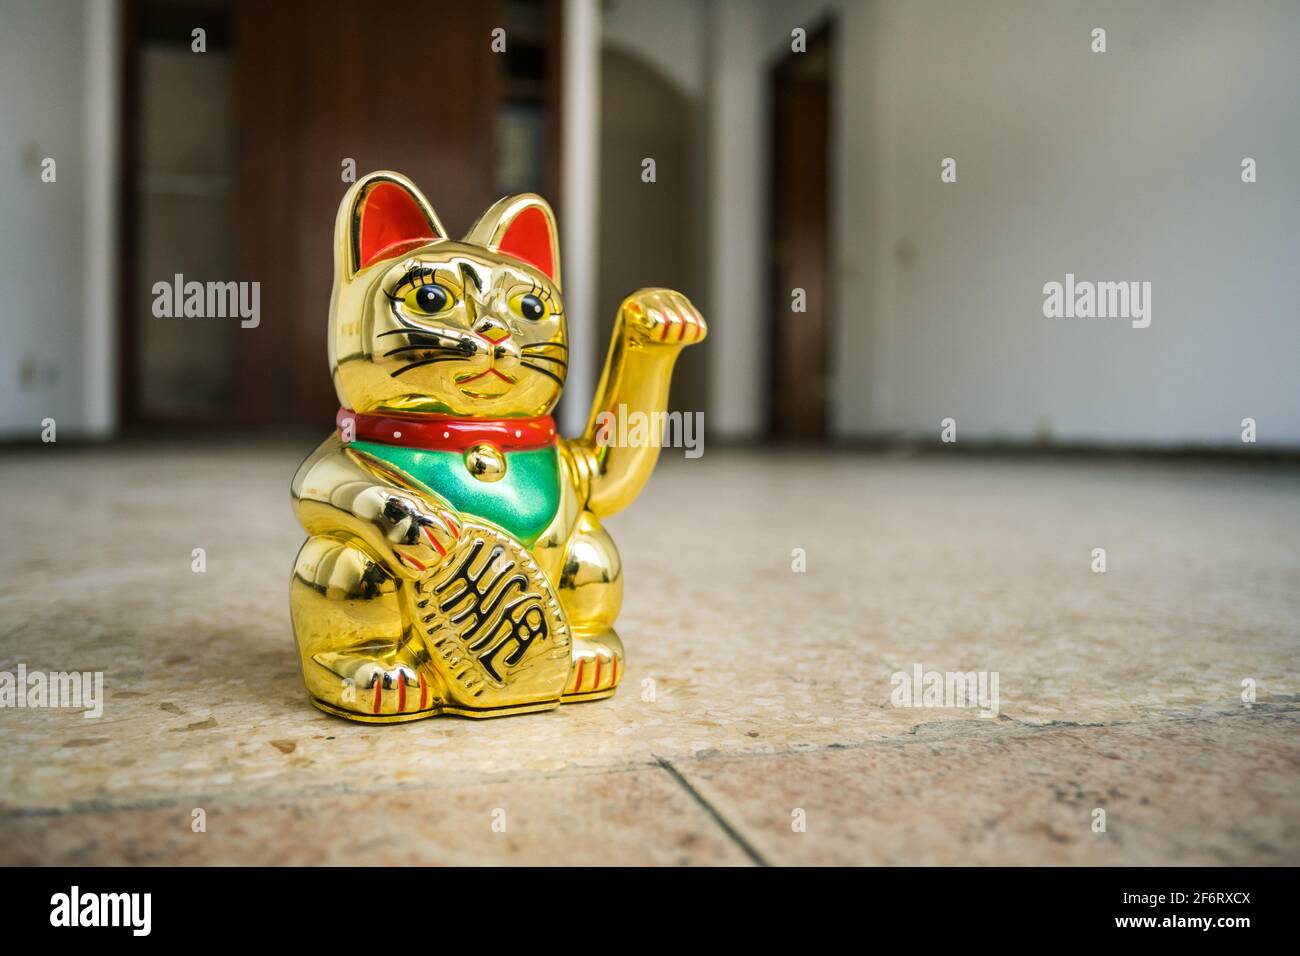 Japanese cat symbolism prosperity in empty house home for sale. Real estate market recovery investing mortgage hope to buy. Stock Photo